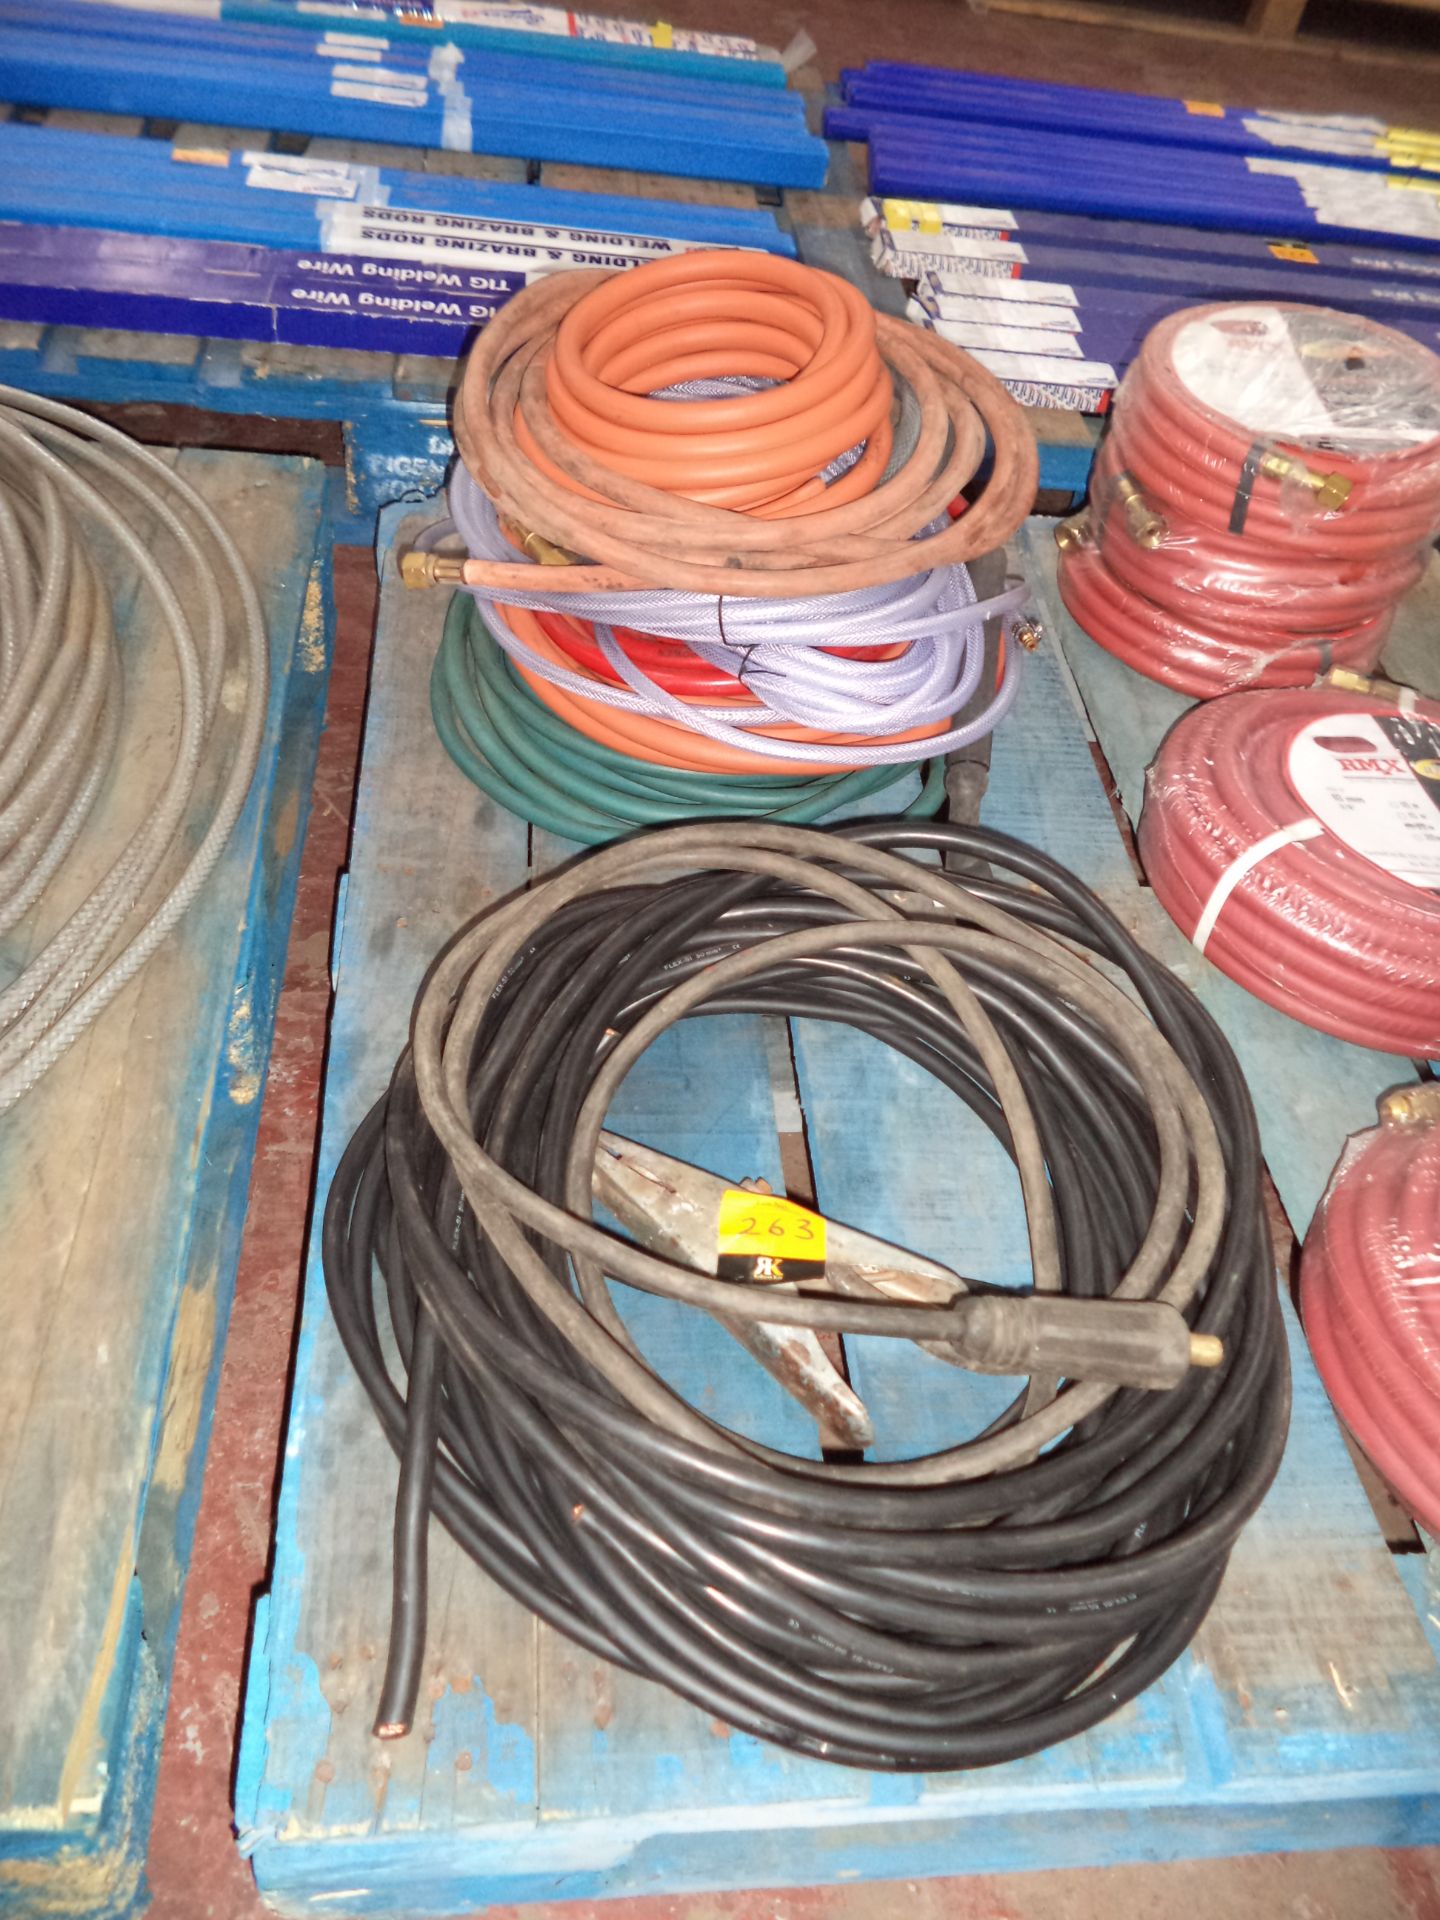 Row of assorted welding hose & related items IMPORTANT: Please remember goods successfully bid